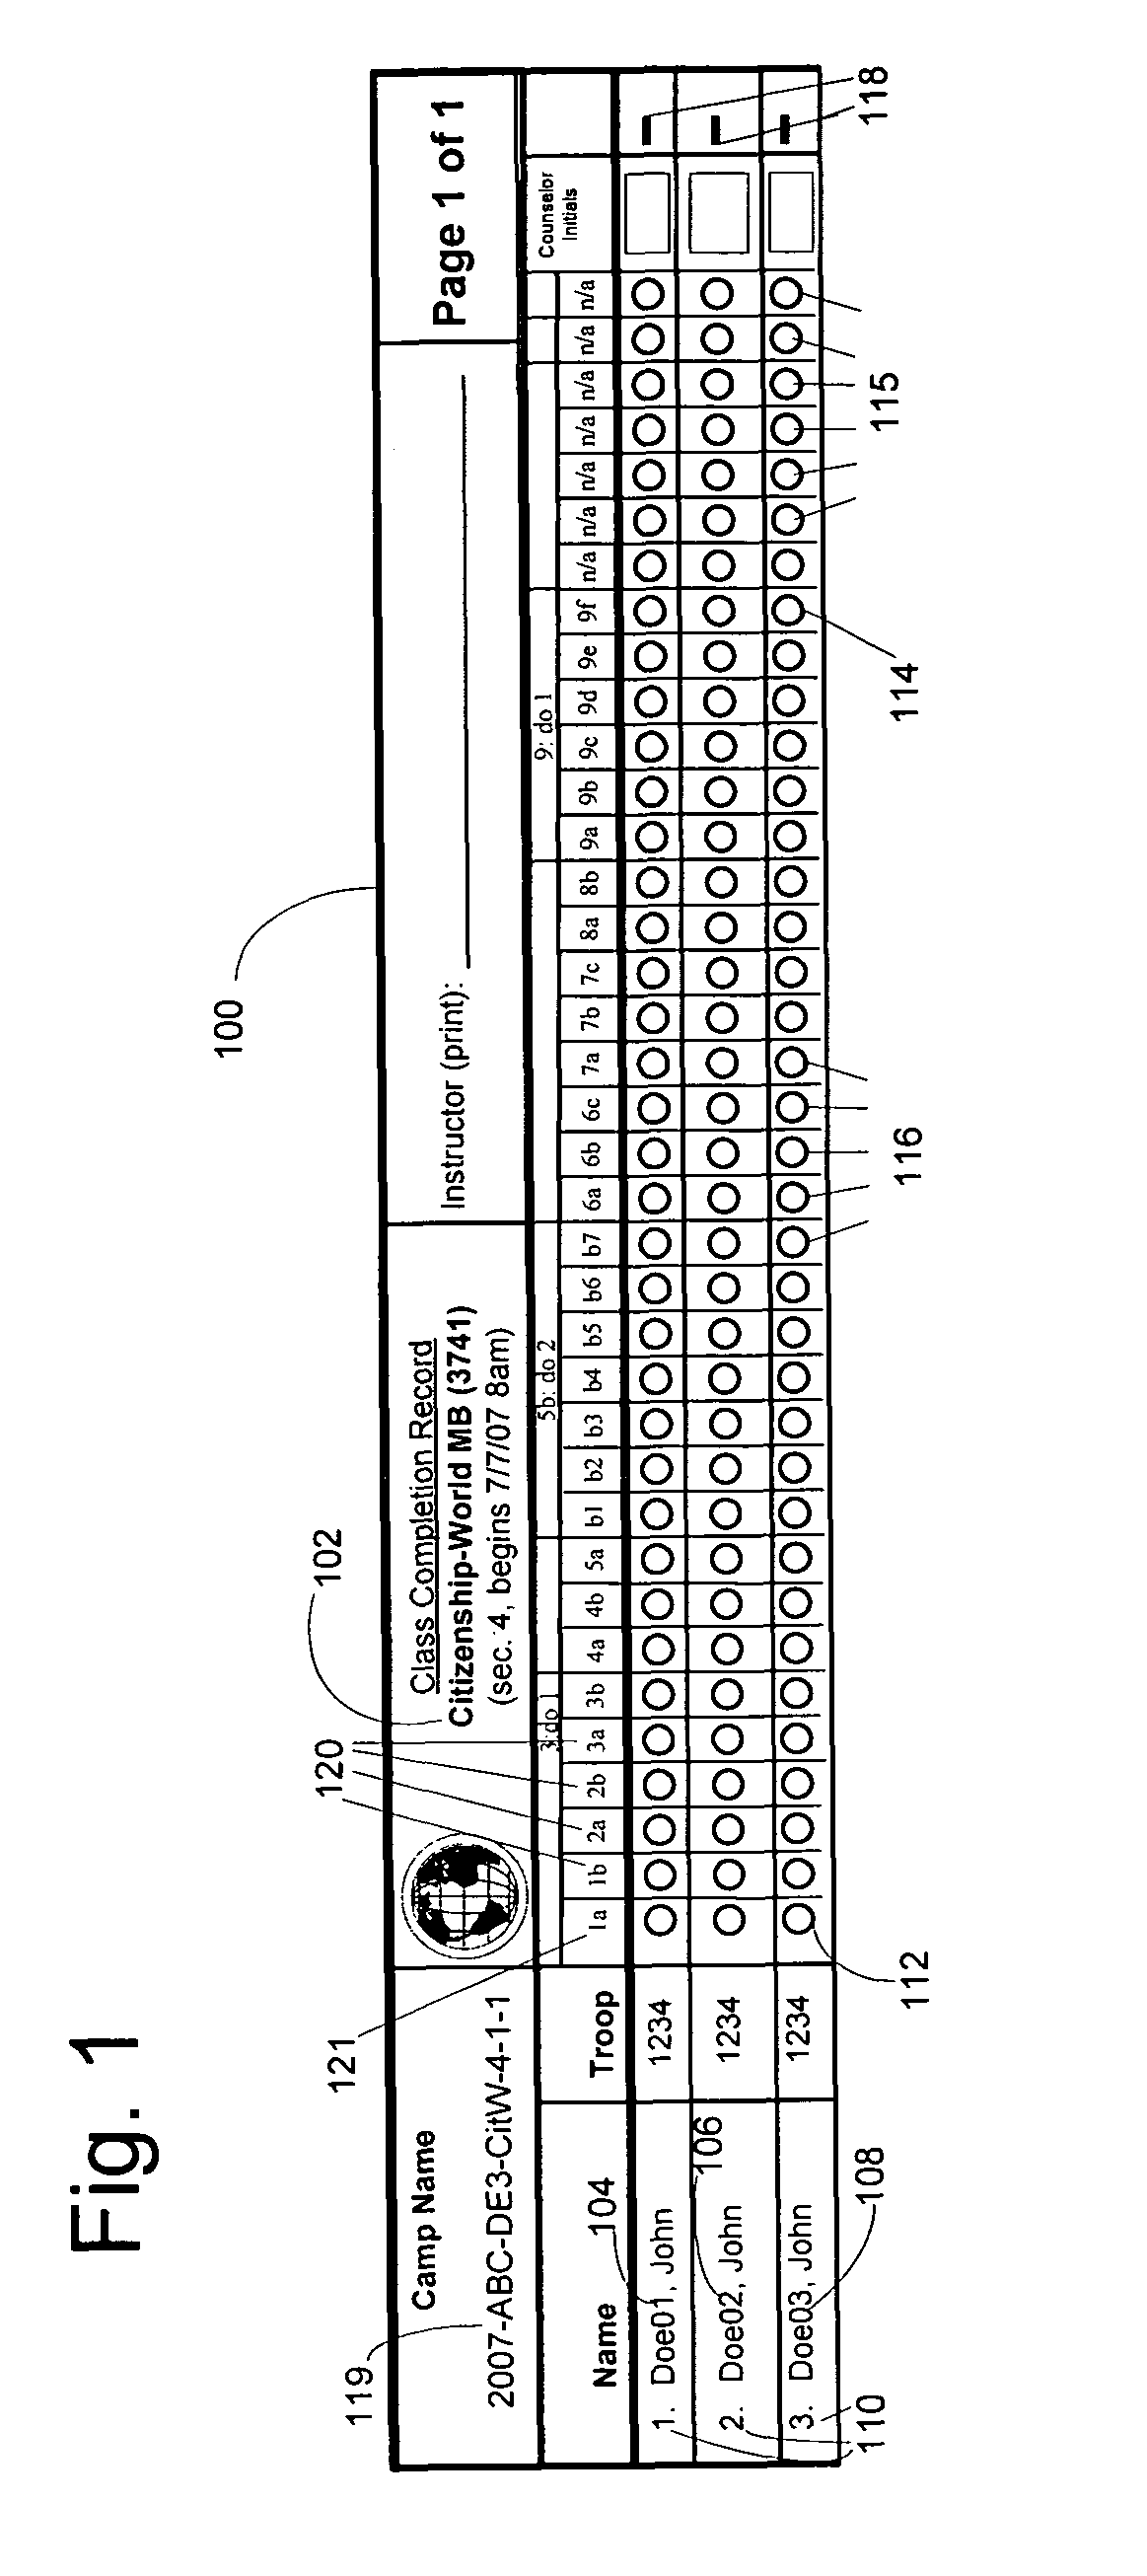 System and method for tracking the fulfillment status of requirements for completing an objective